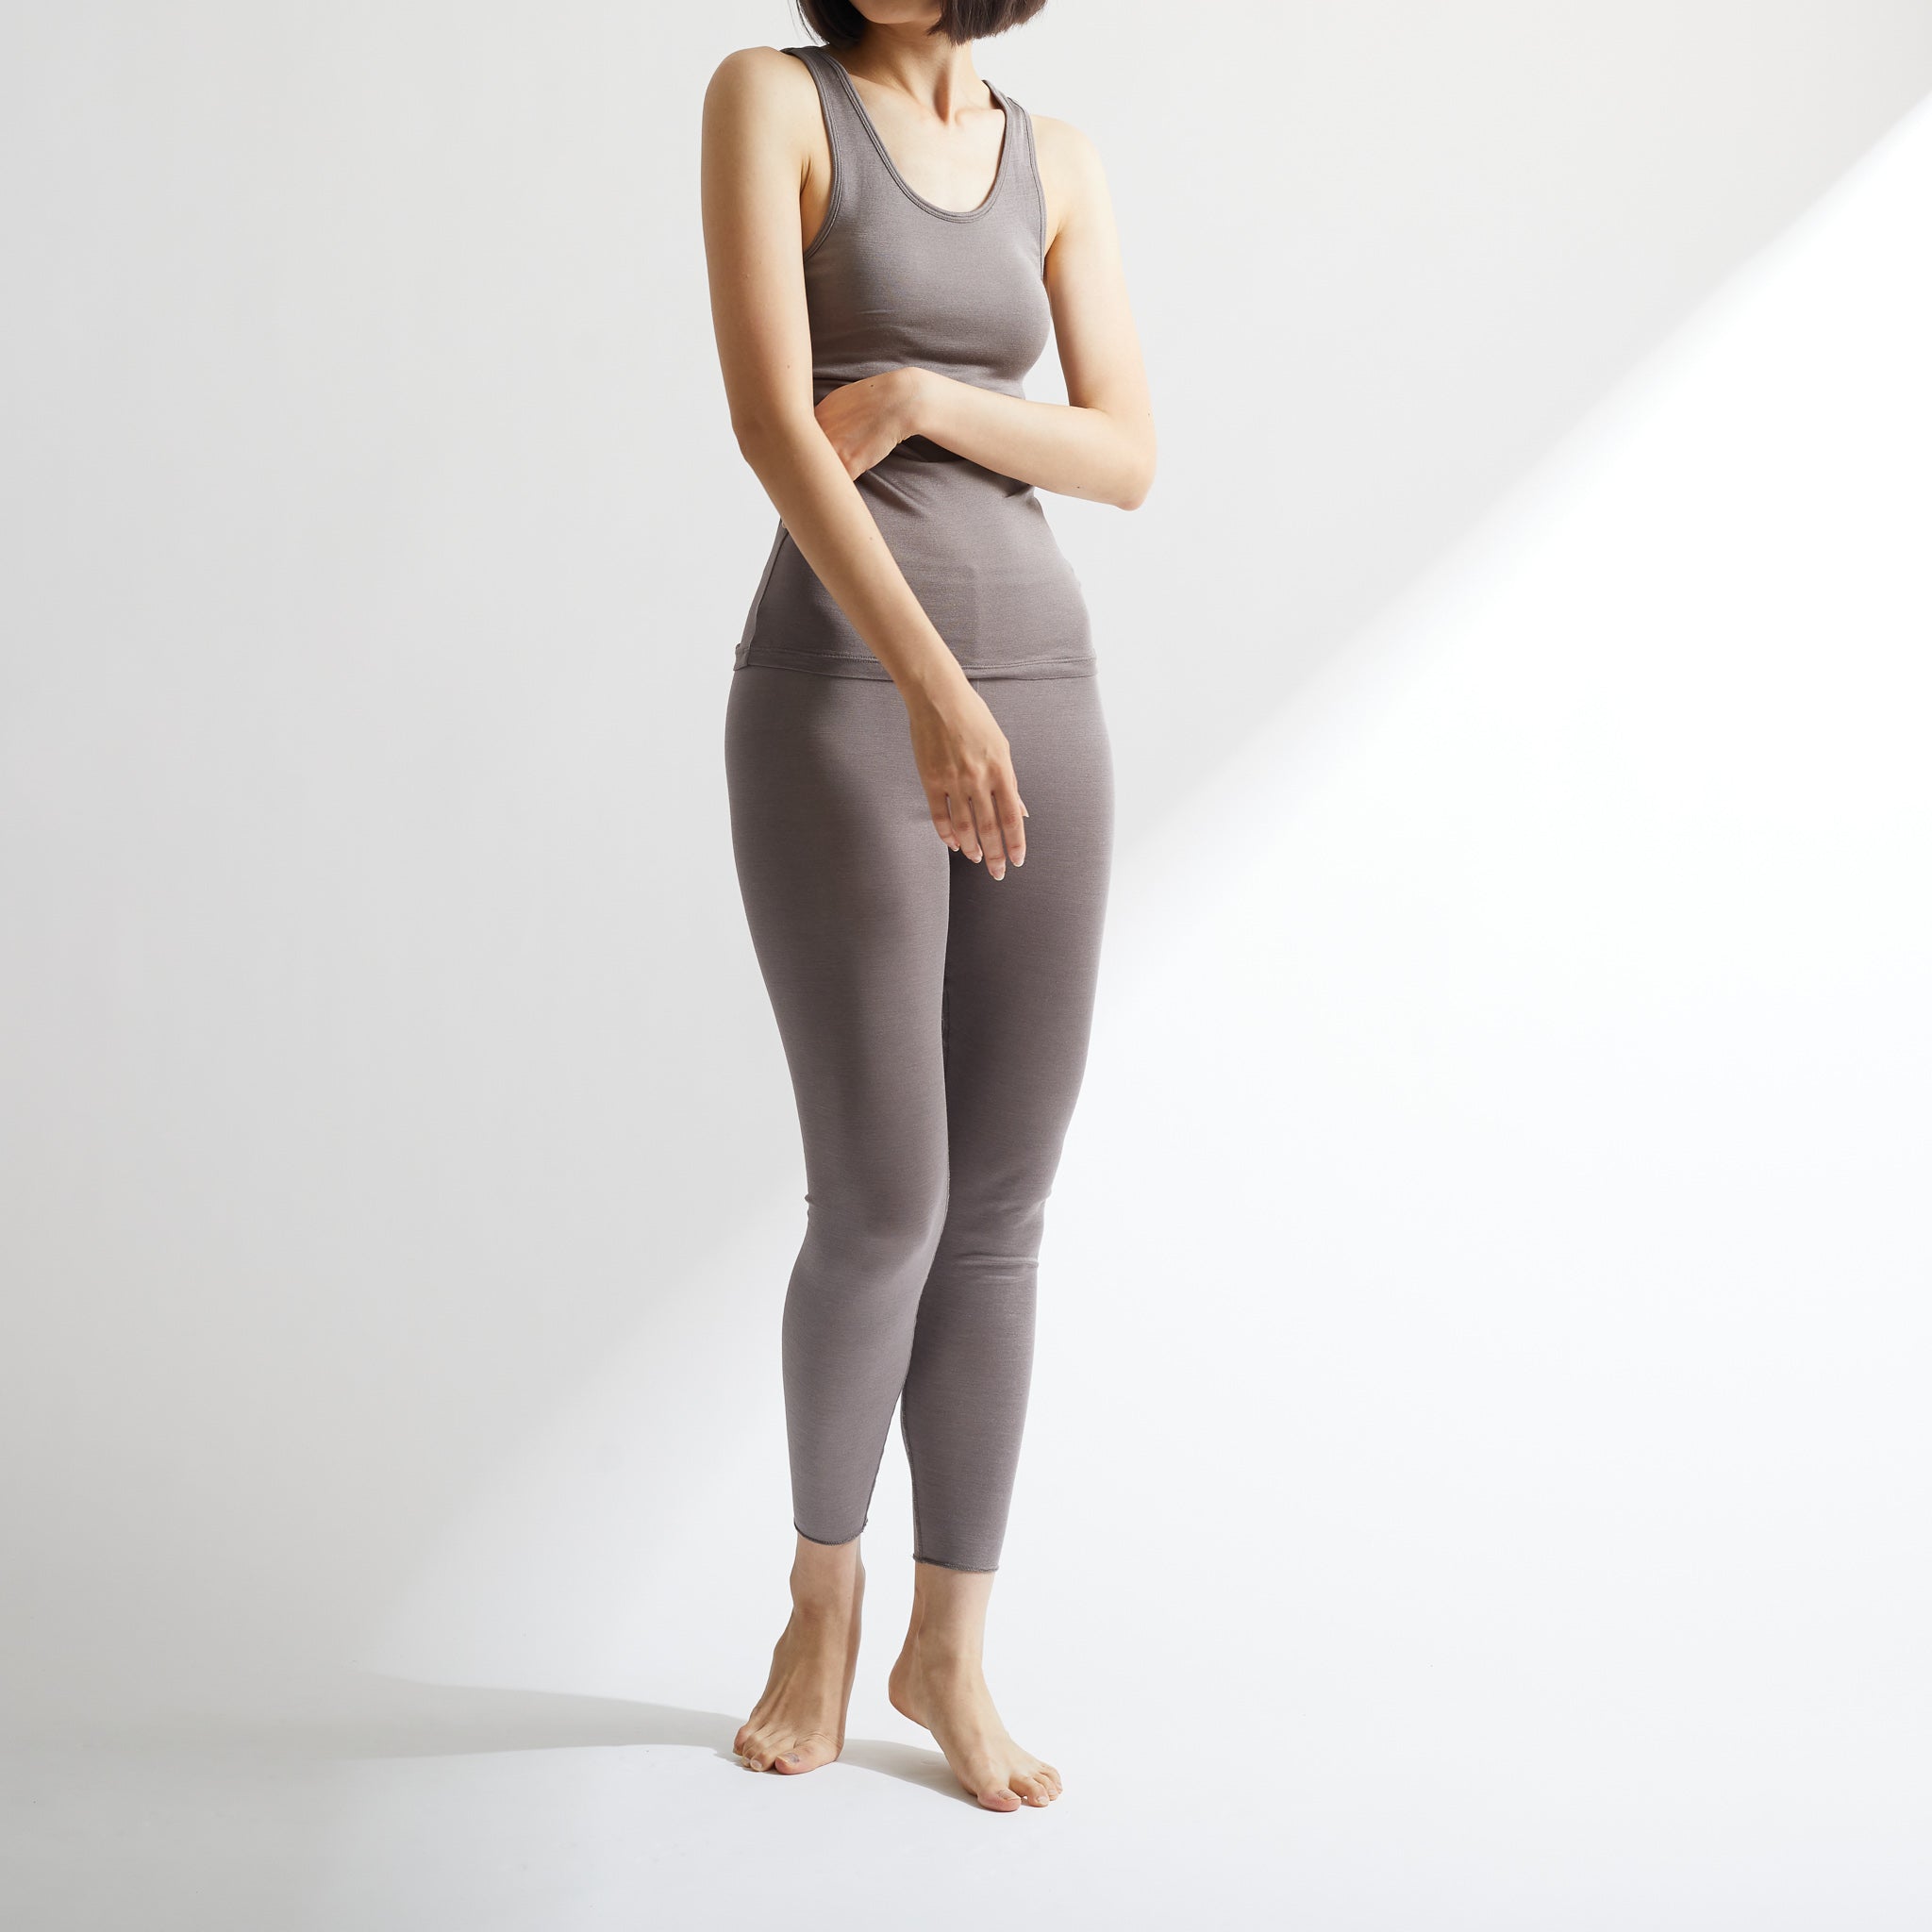 100% Silk Tank Top with Bra in Taupe (2020 model)